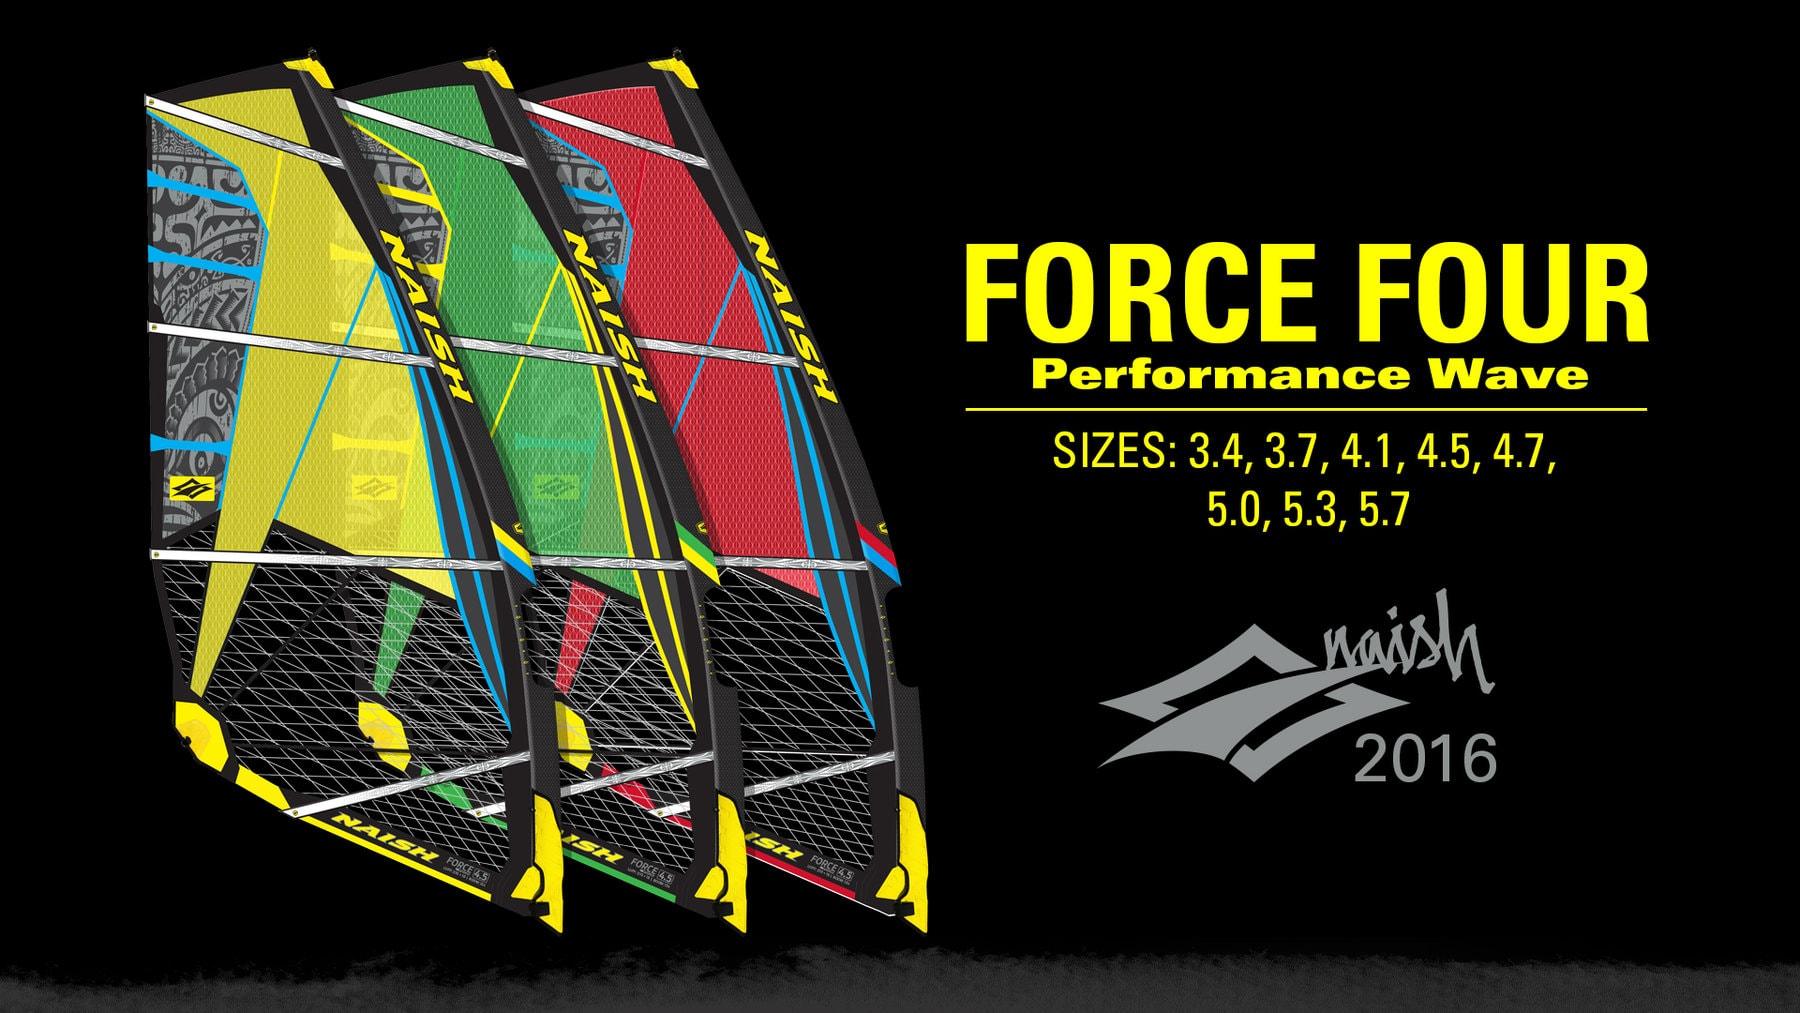 Force FOUR - Product Video - Naish.com